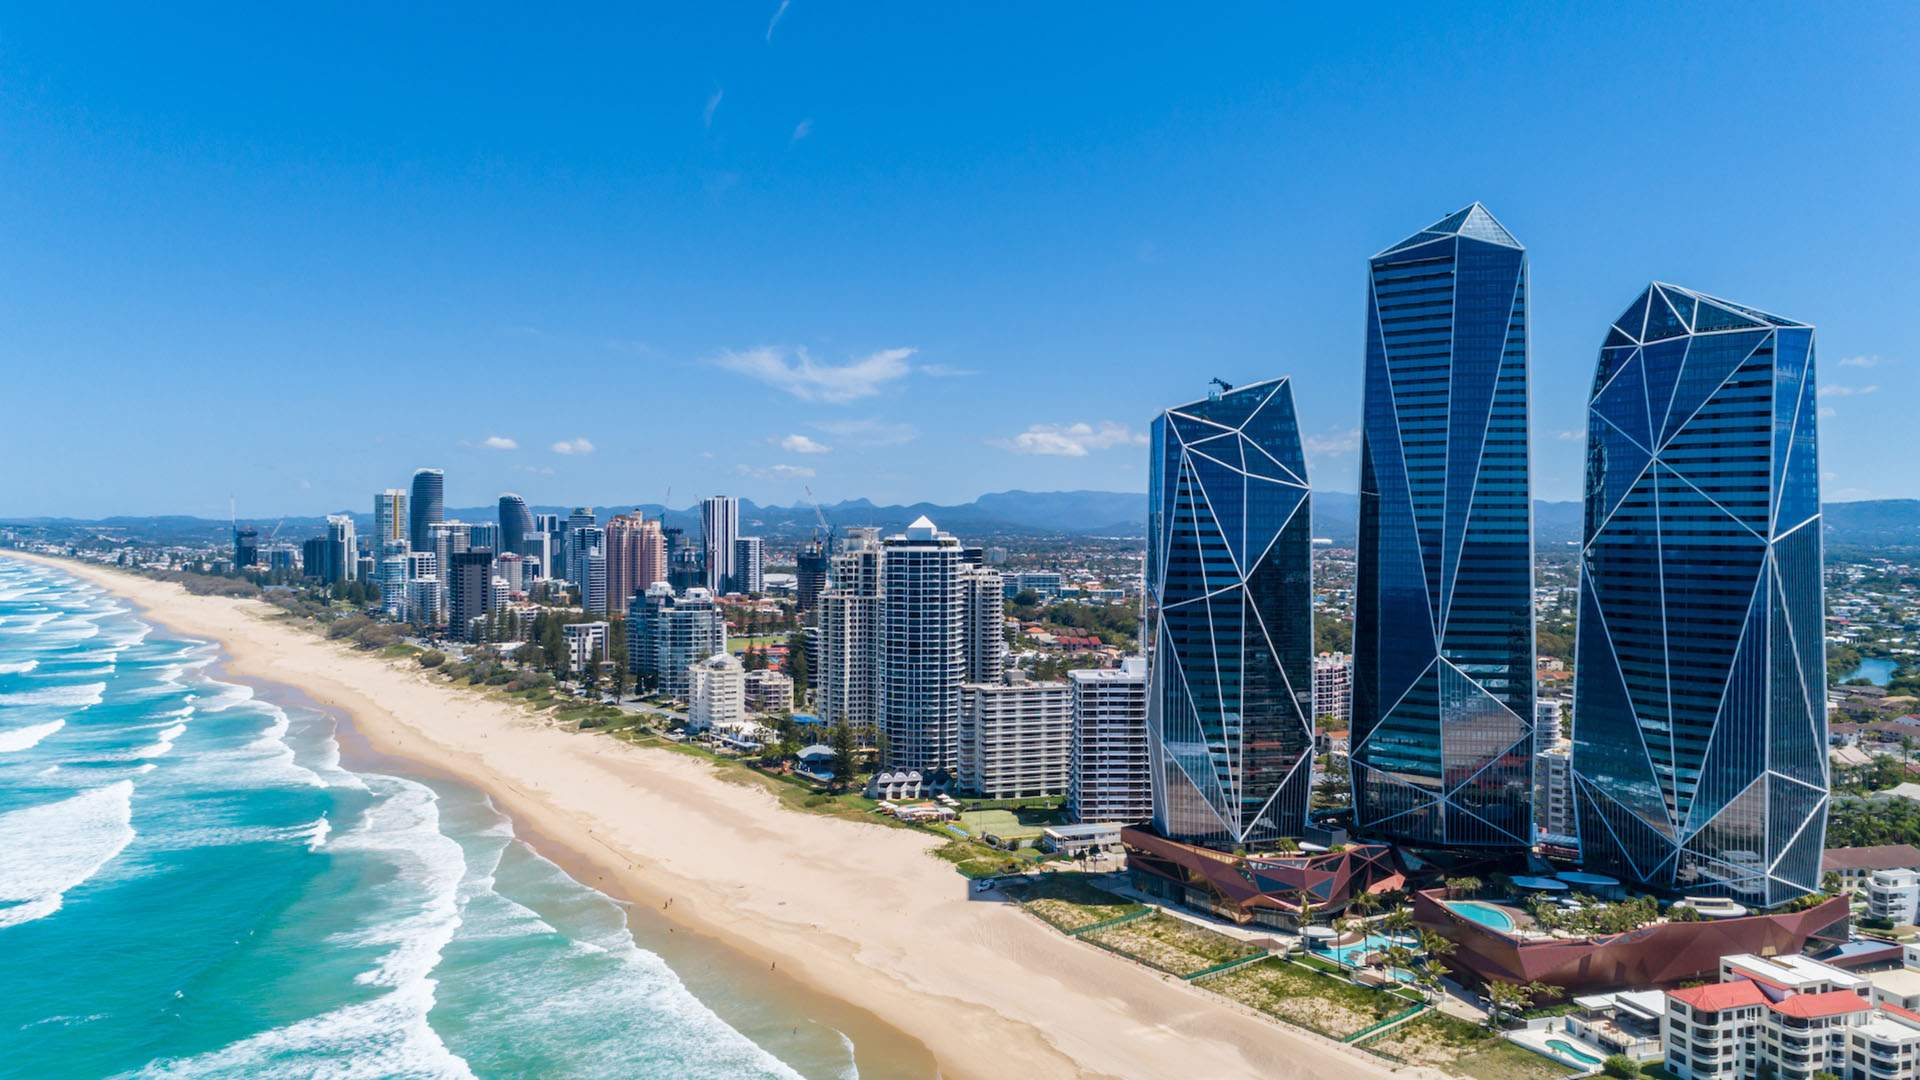 The Langham Is the Gold Coast's Soon-to-Open New Five-Star Hotel with Direct Beachfront Access